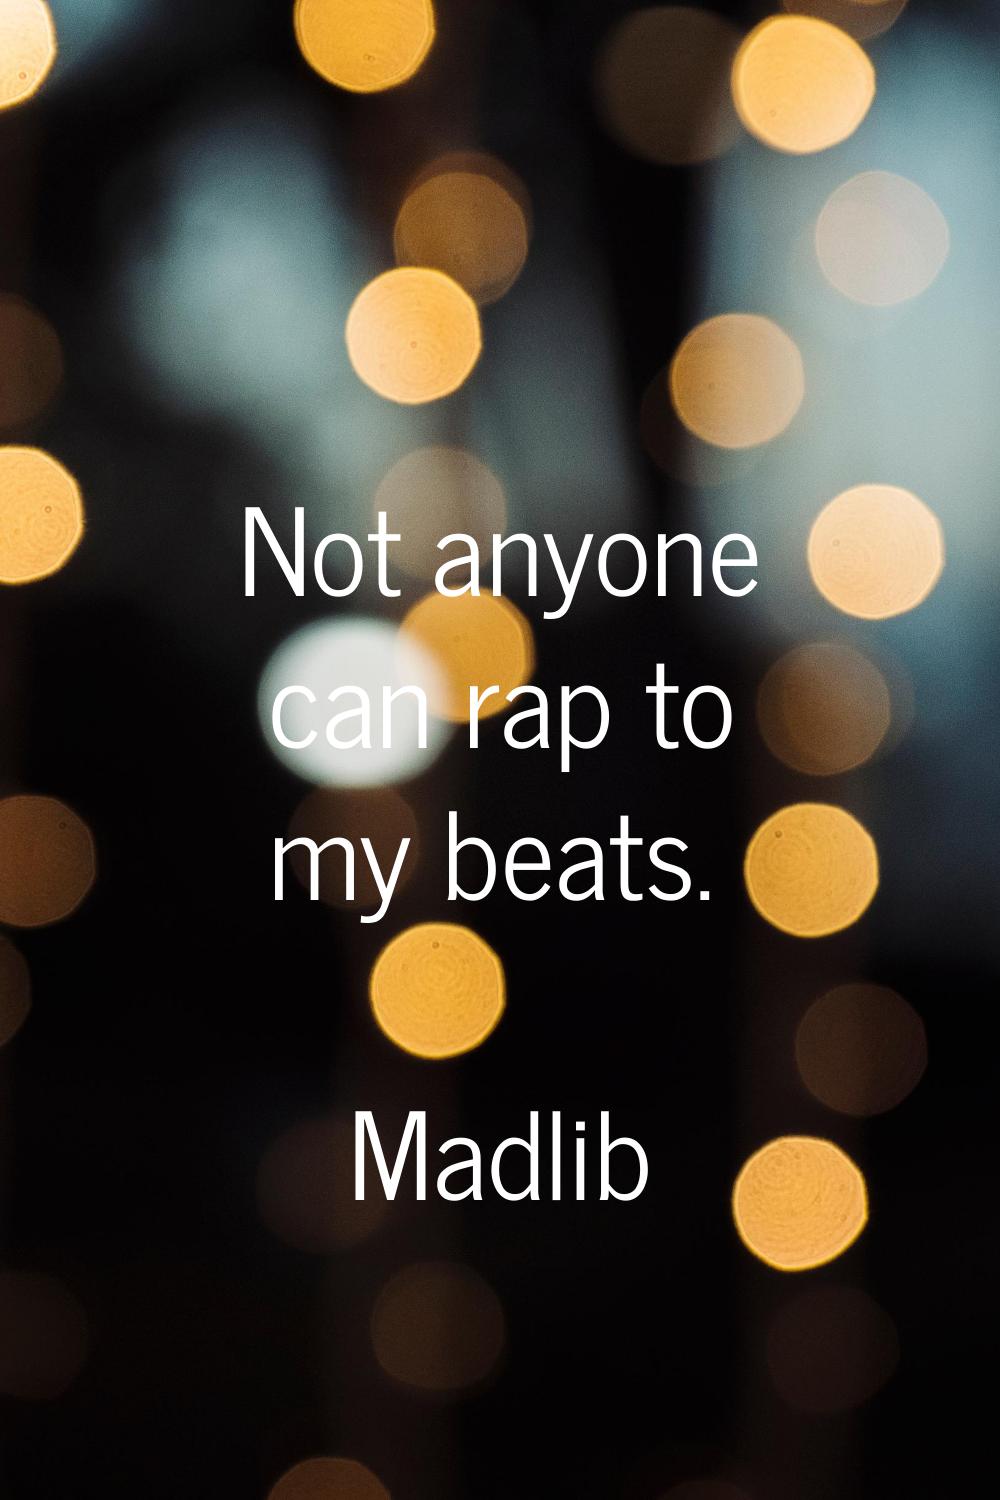 Not anyone can rap to my beats.